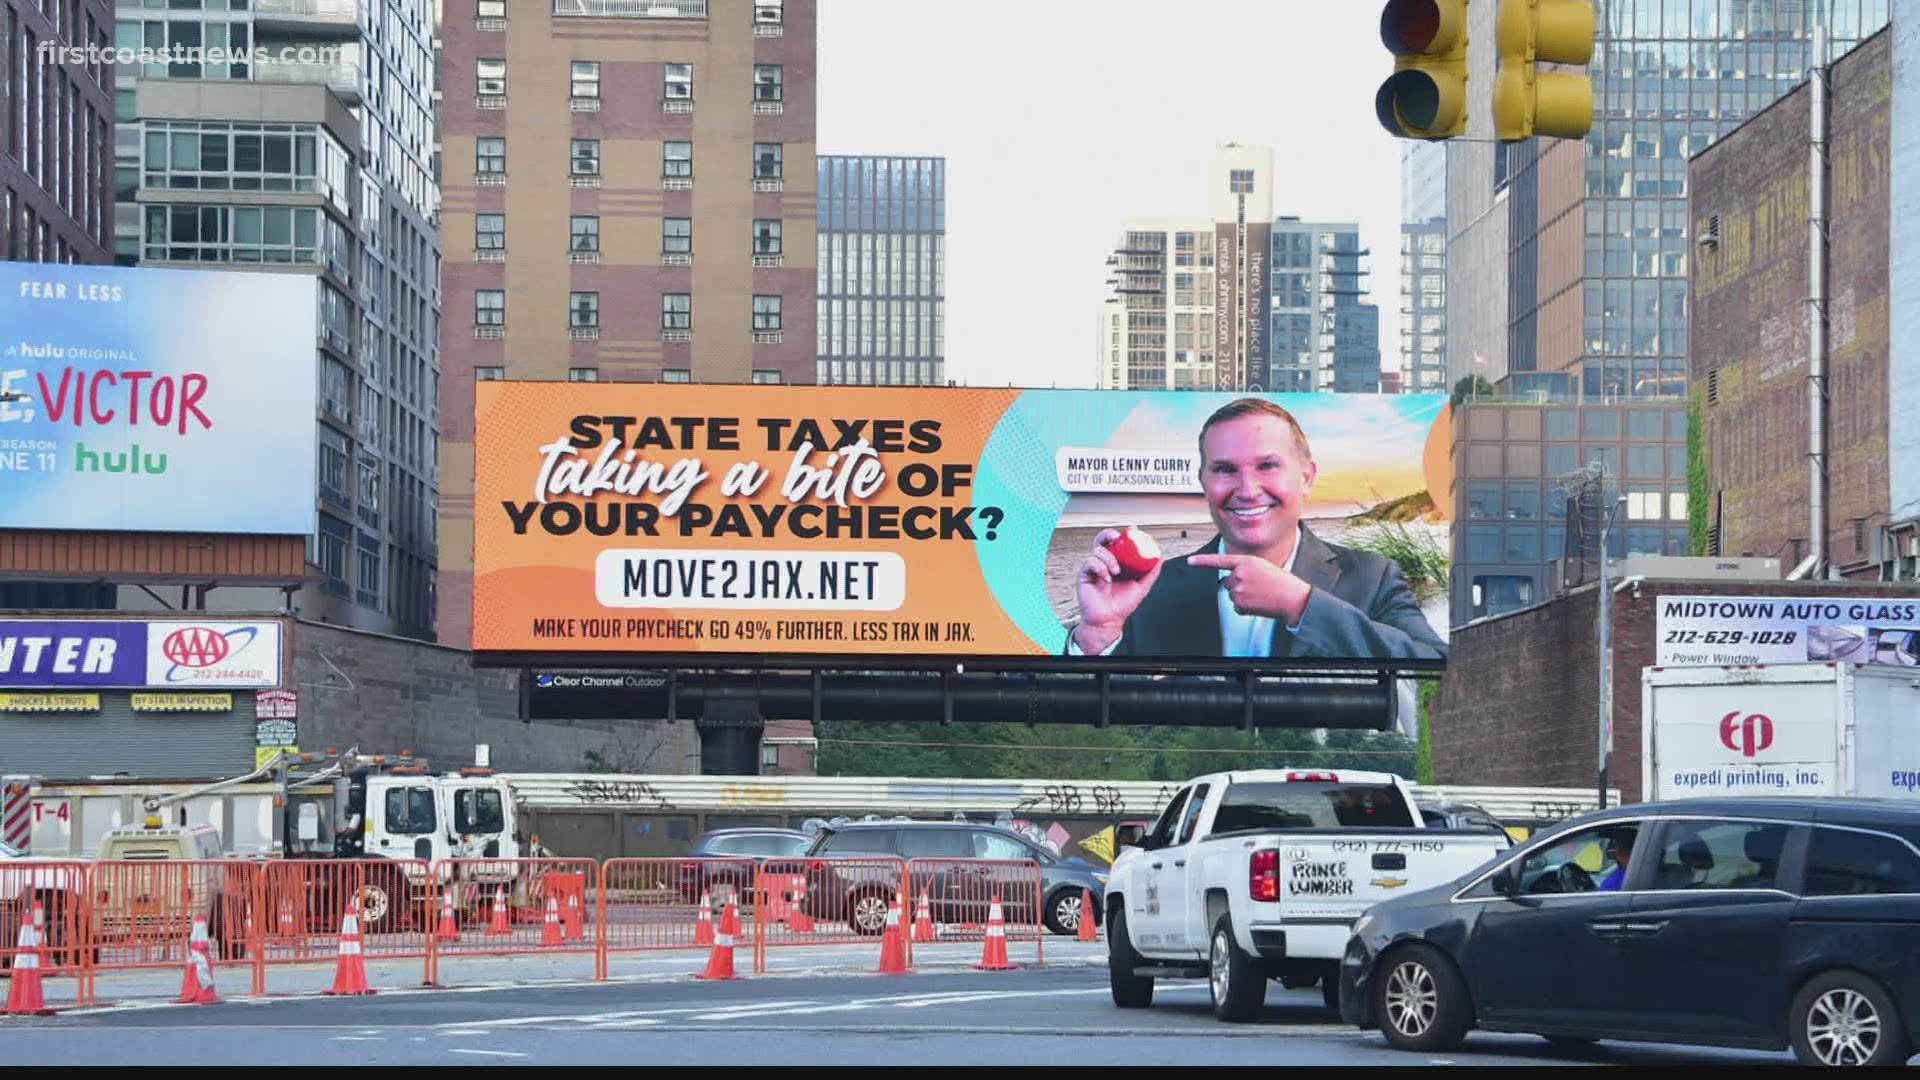 Mayor wants to lure digital nomads to Jacksonville with new billboard